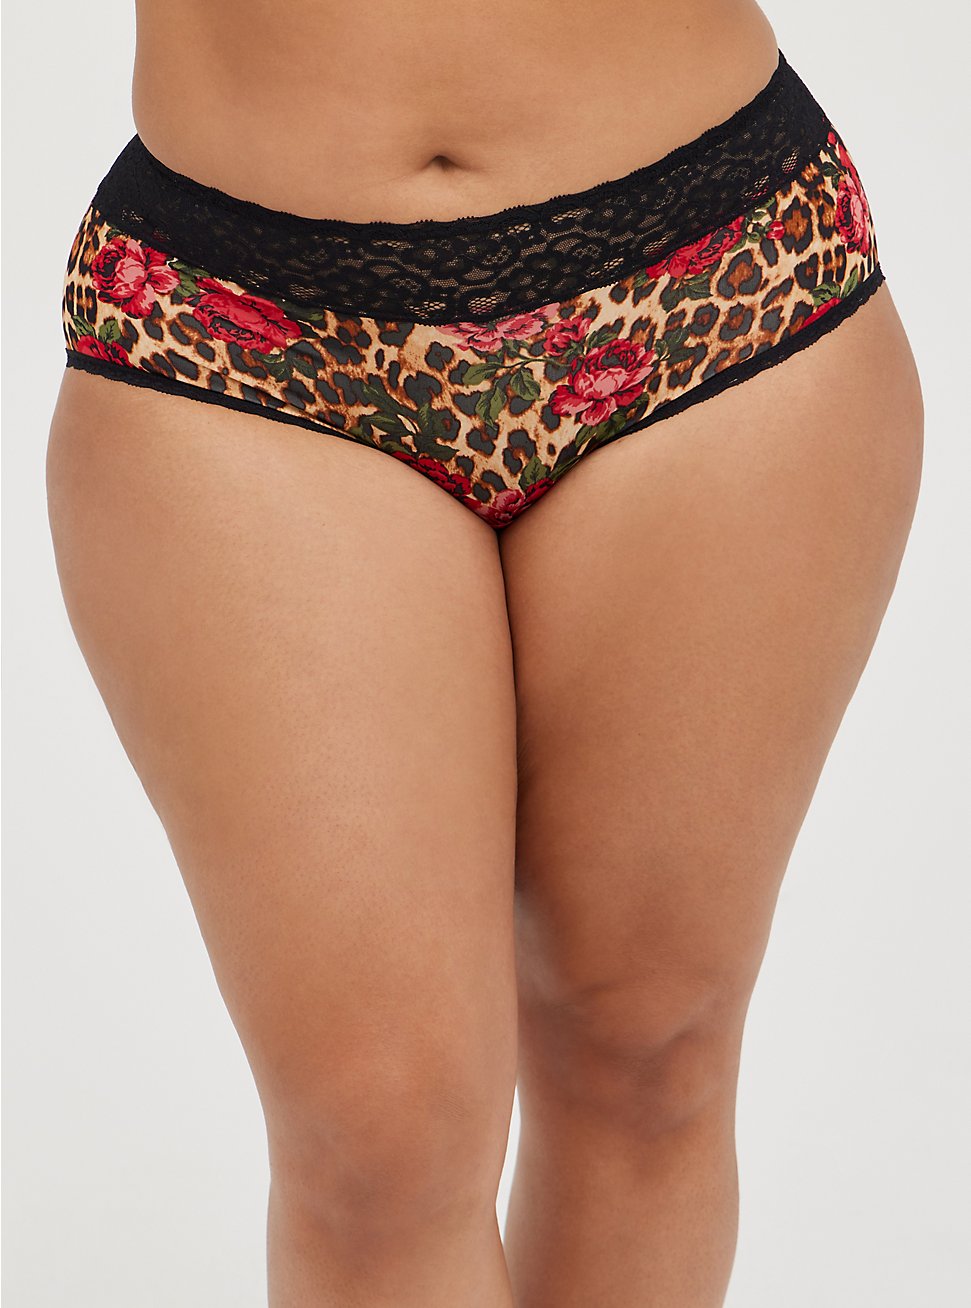 Wide Lace Trim Second Skin Cheeky Panty - Leopard Floral , TRADITIONAL ROSES, hi-res